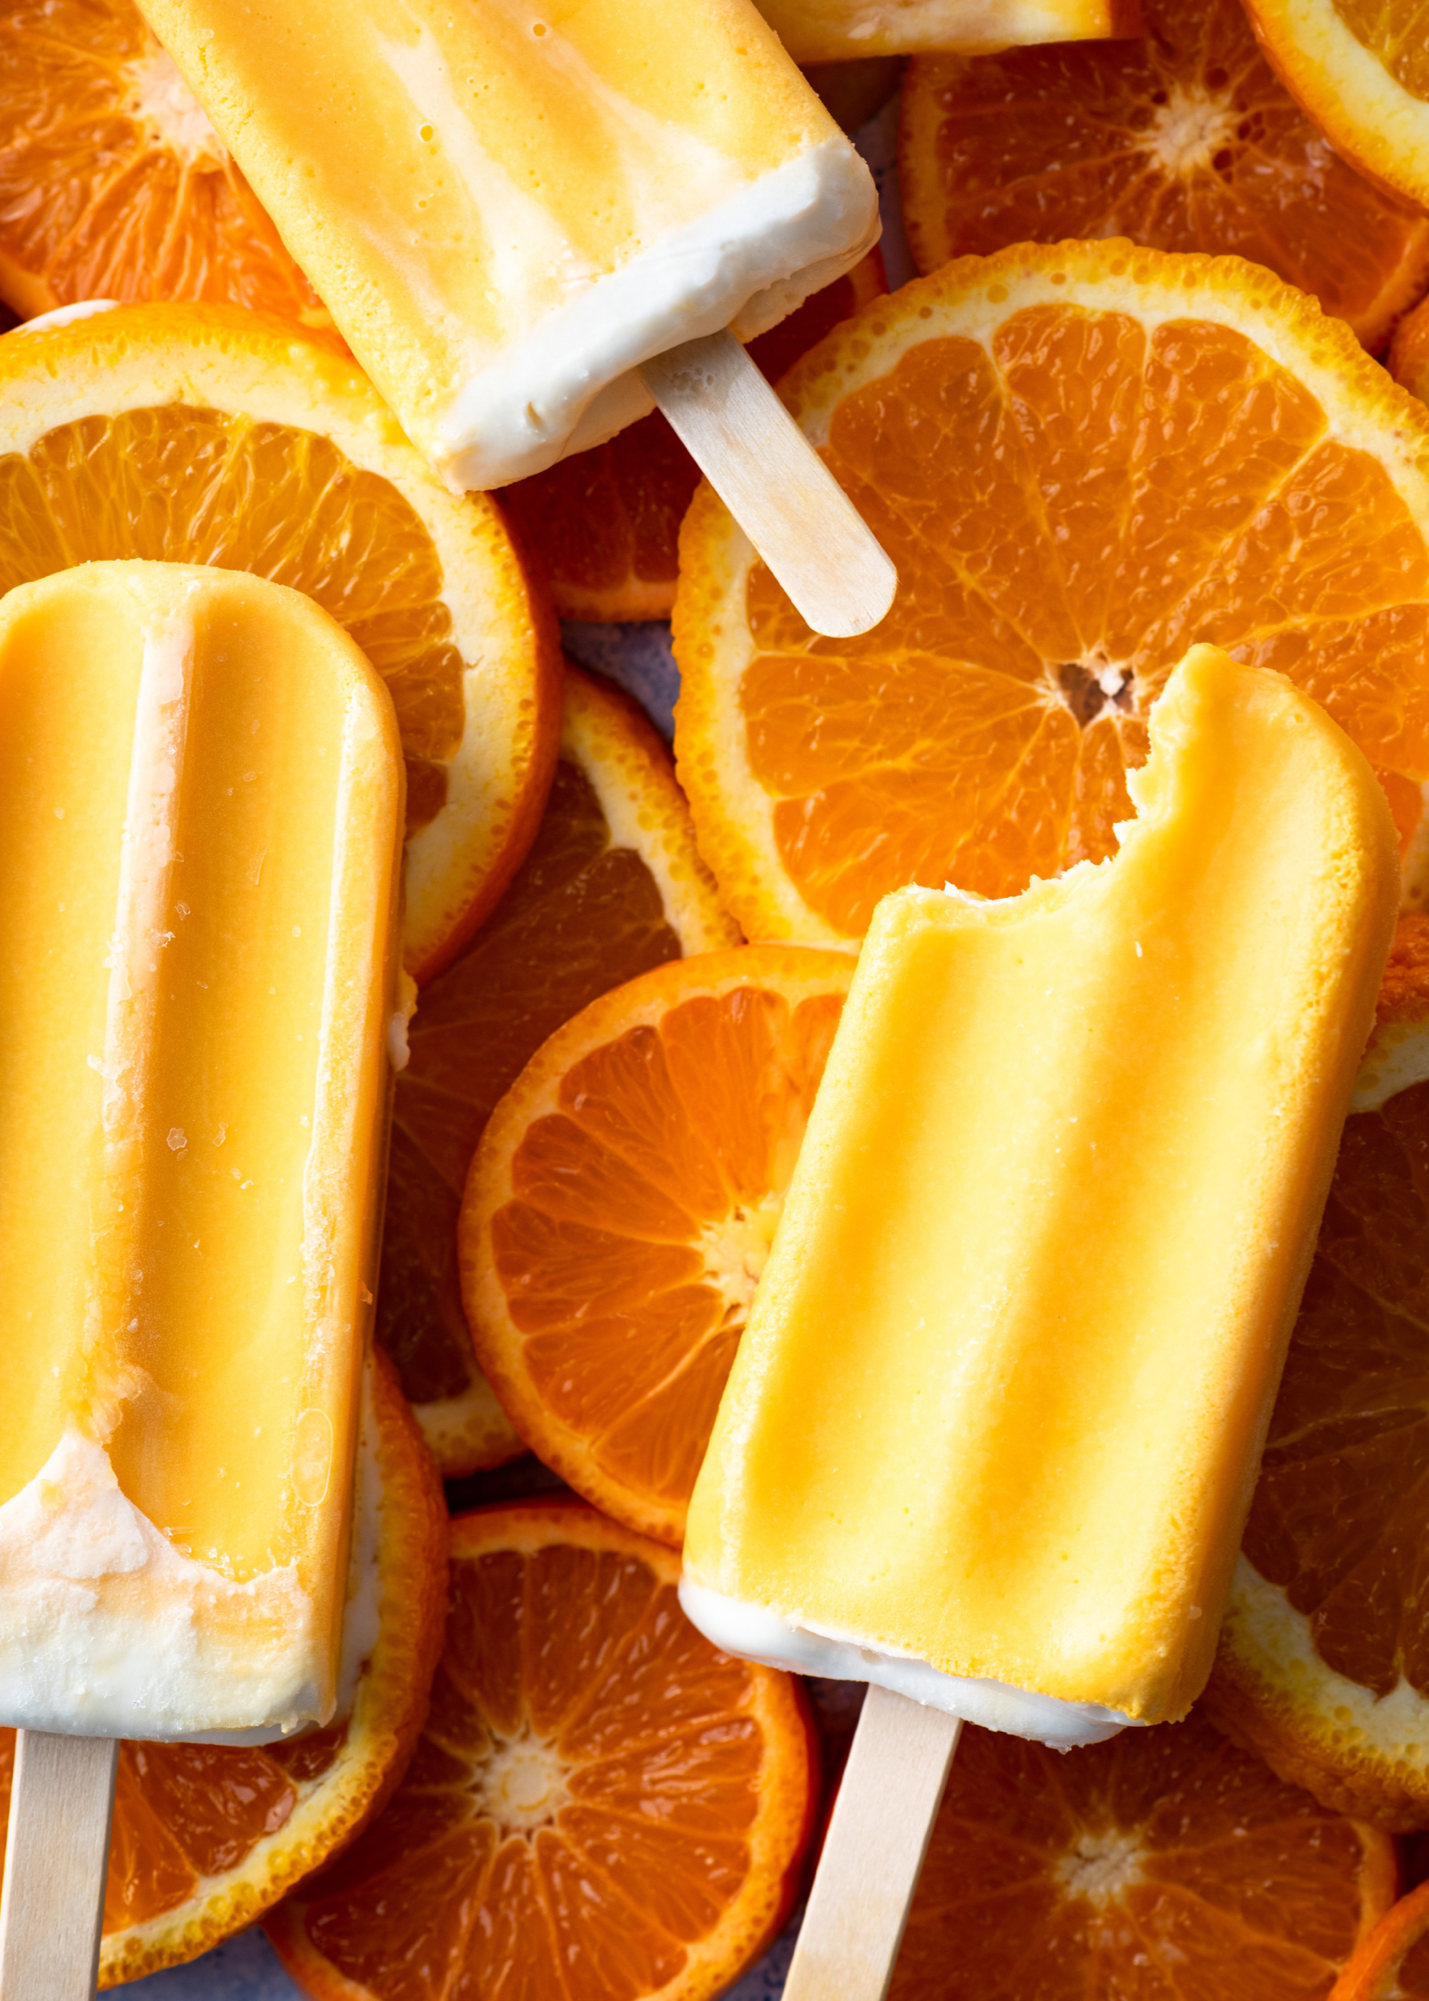 creamsicle pops and orange slices